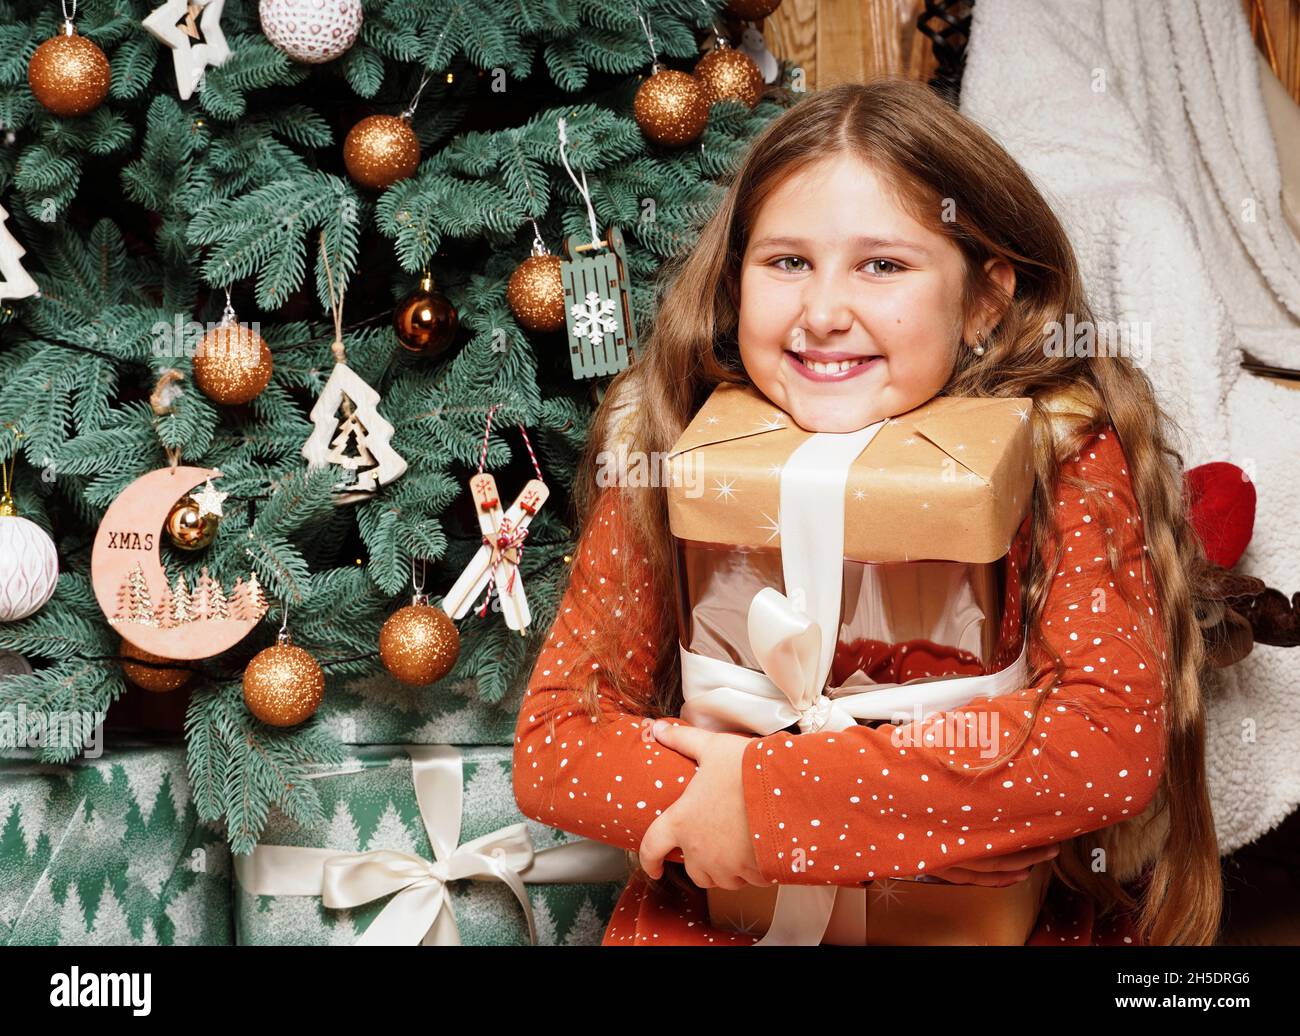 Young happy smiling long haired girl opening her Christmas gift on decorated Christmas tree background.. Girl at Xmas. Rustic concept. Stock Photo